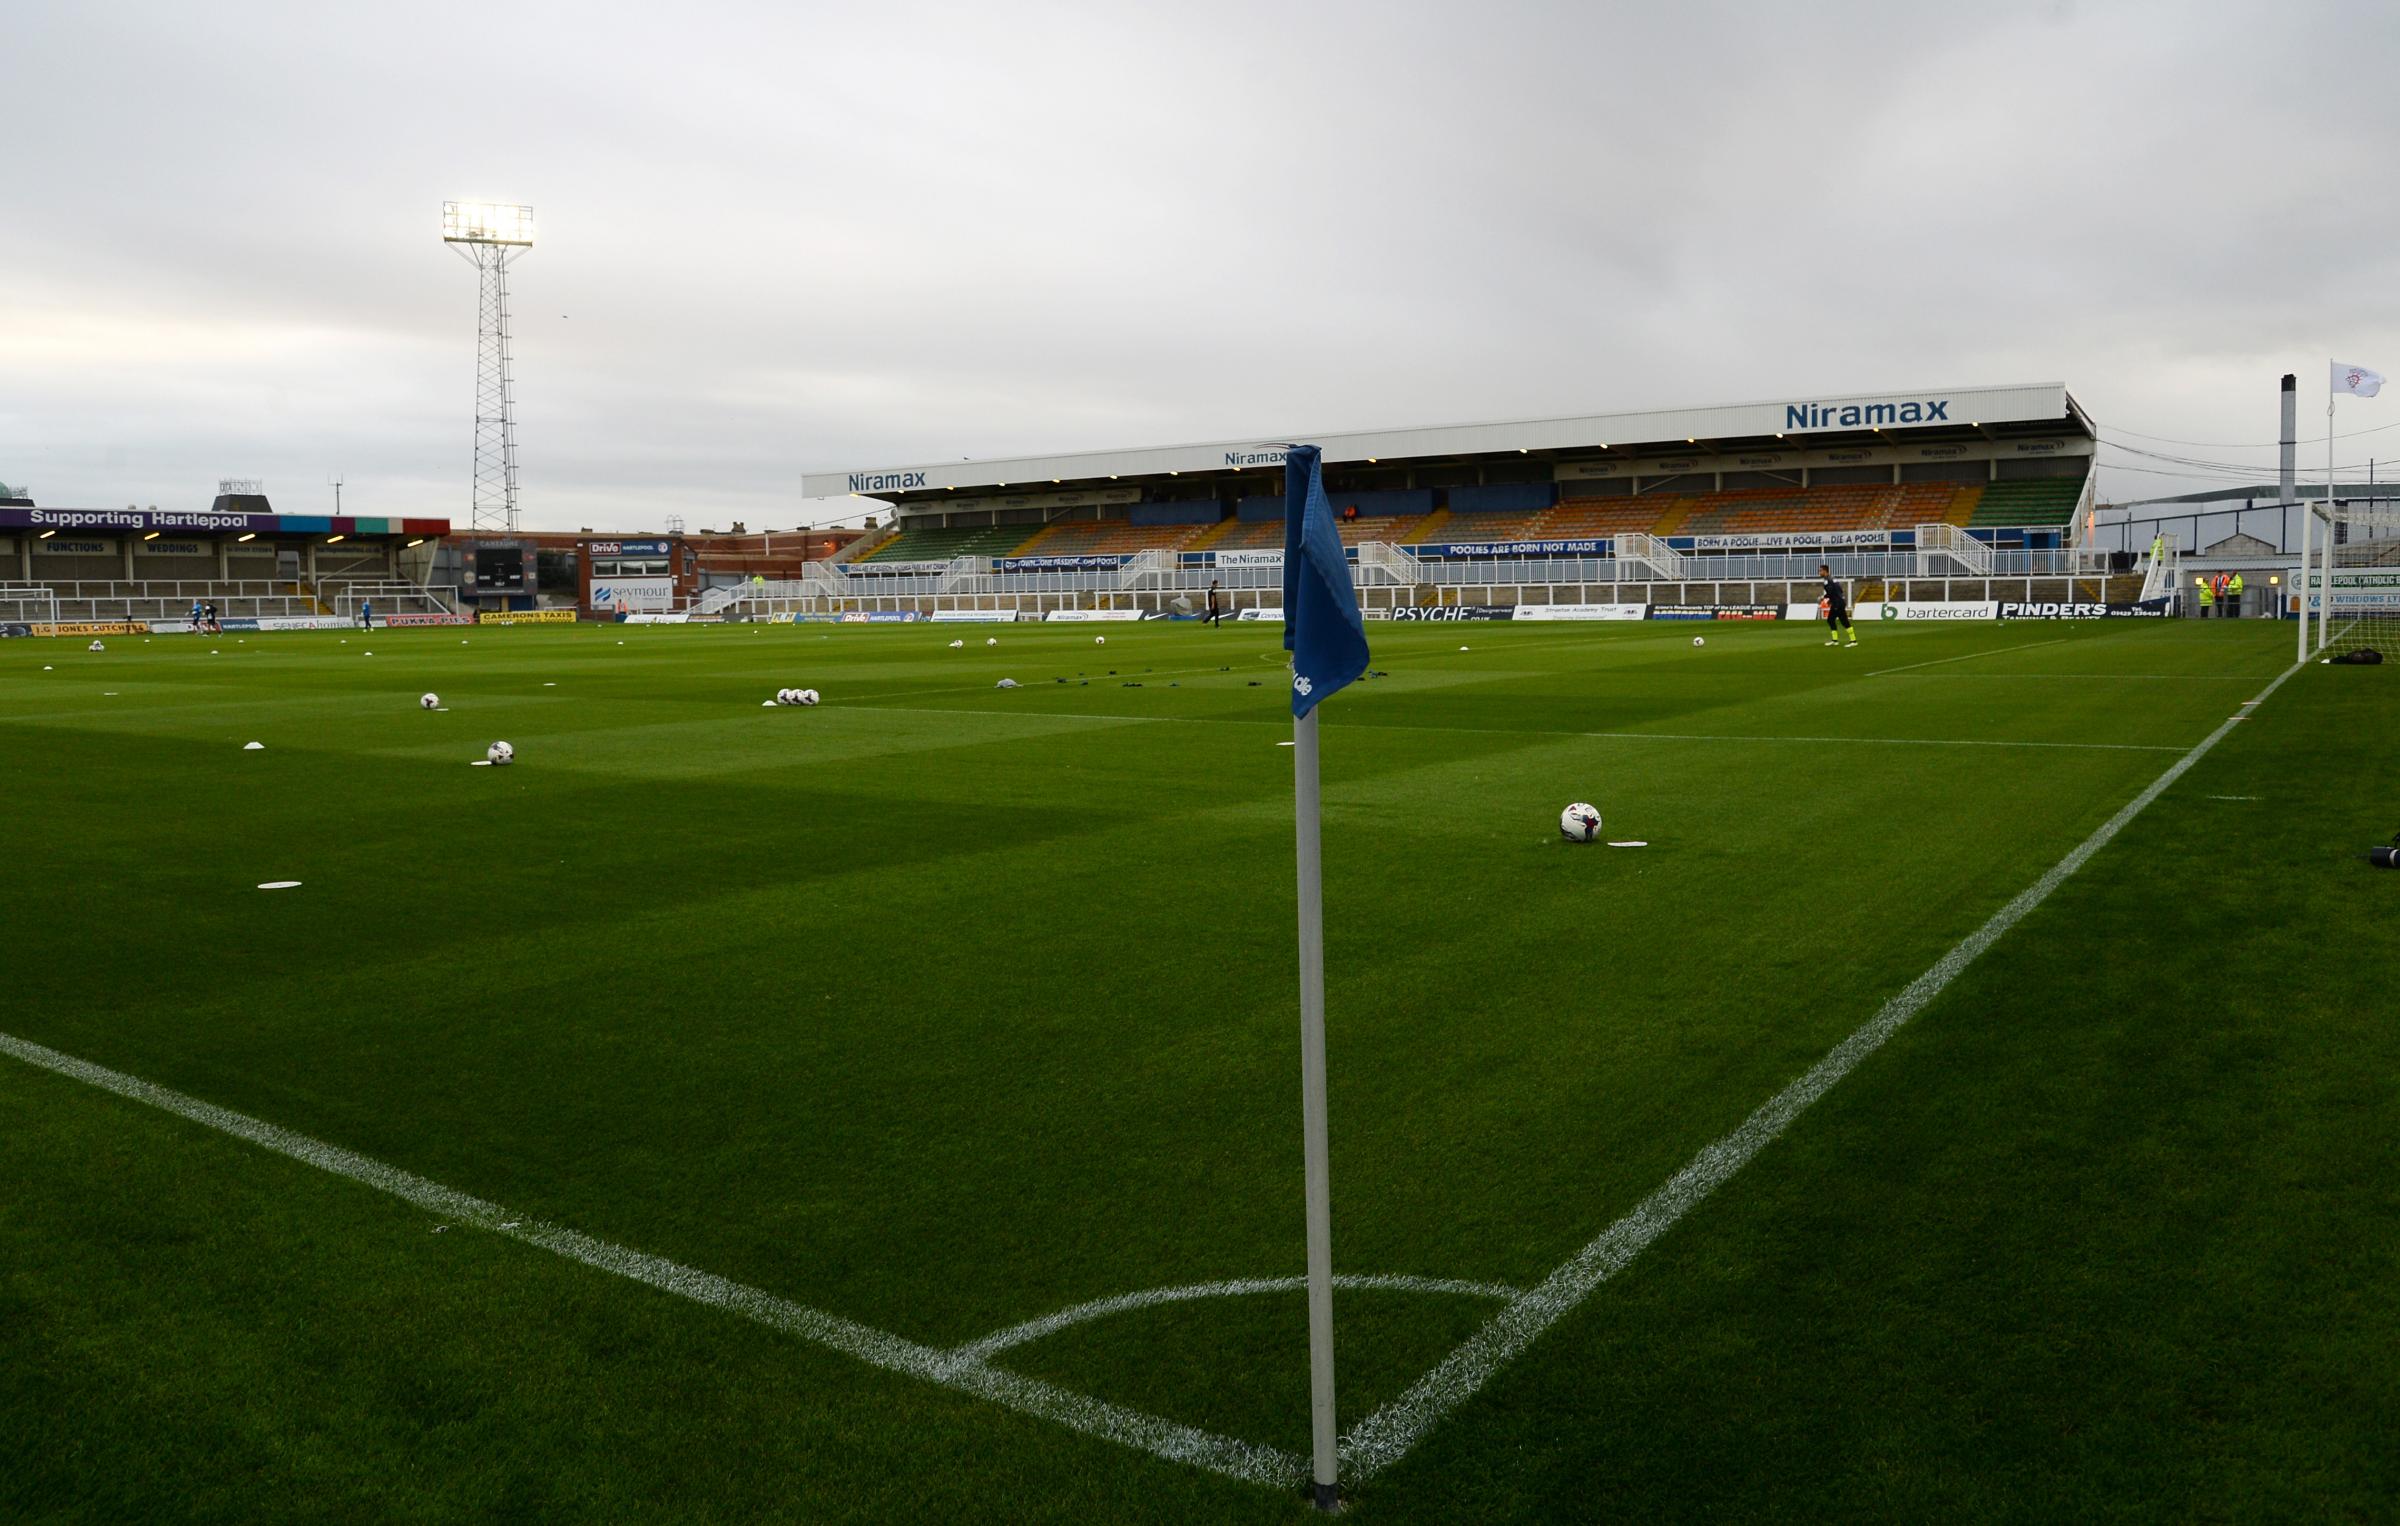 Hartlepool United v Bolton Wanderers: How to watch on TV, live stream